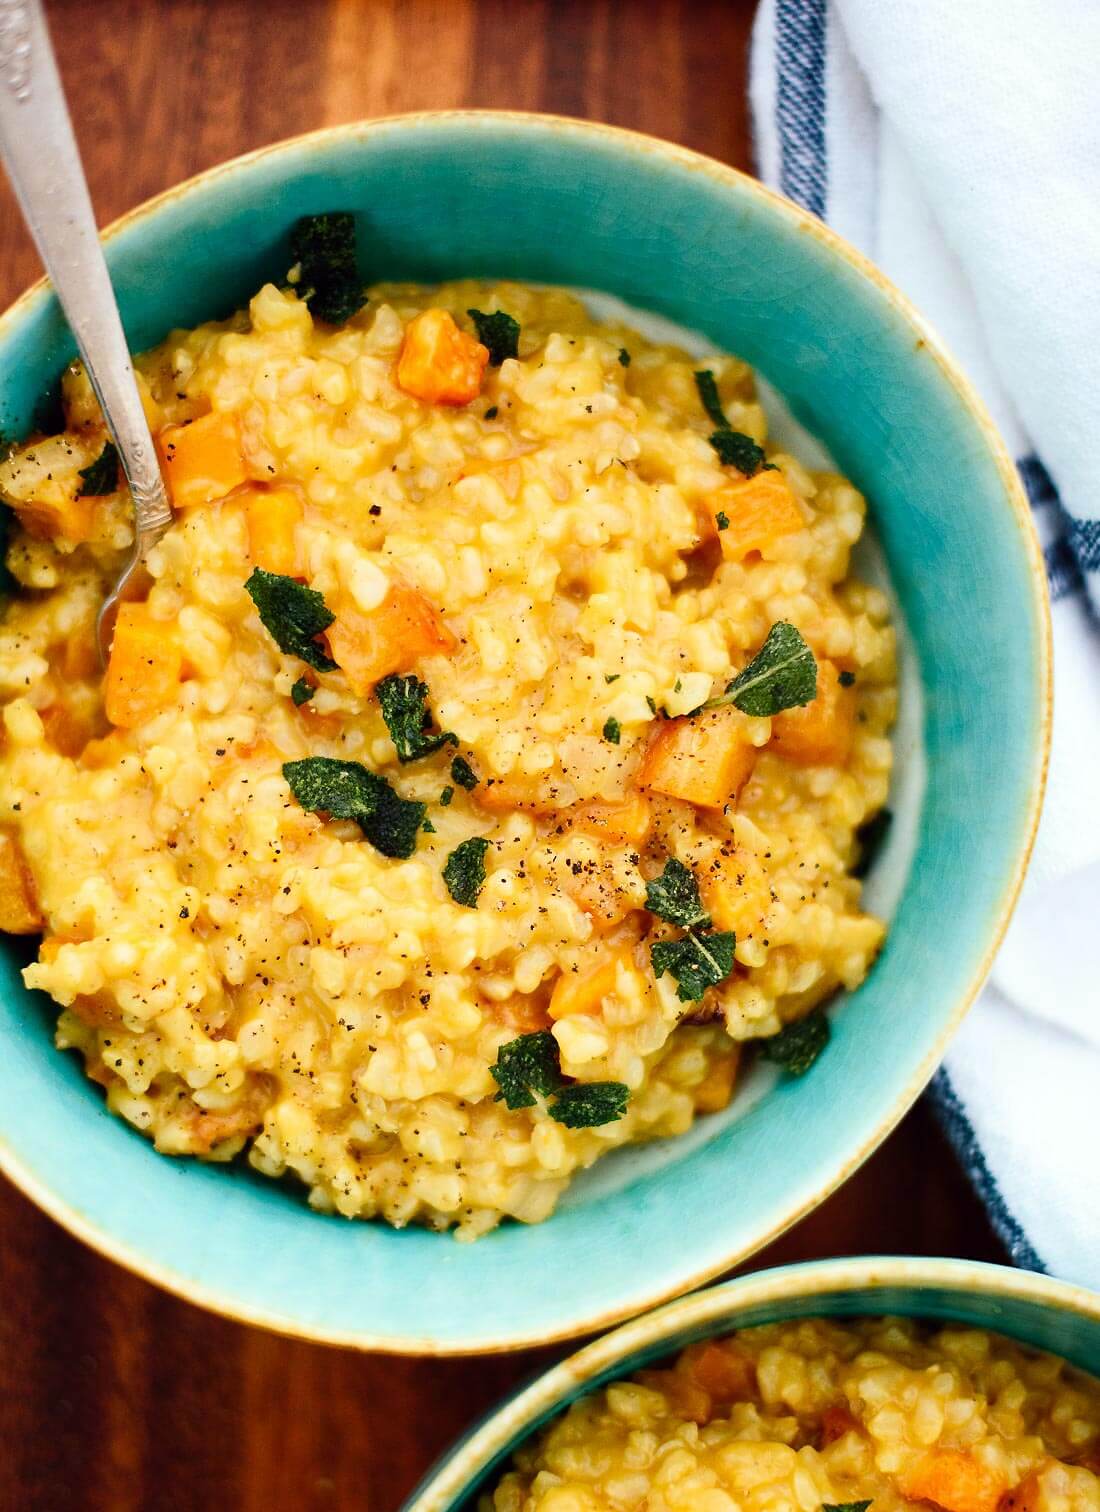 This roasted butternut risotto tastes heavenly and hardly requires any stirring! cookieandkate.com